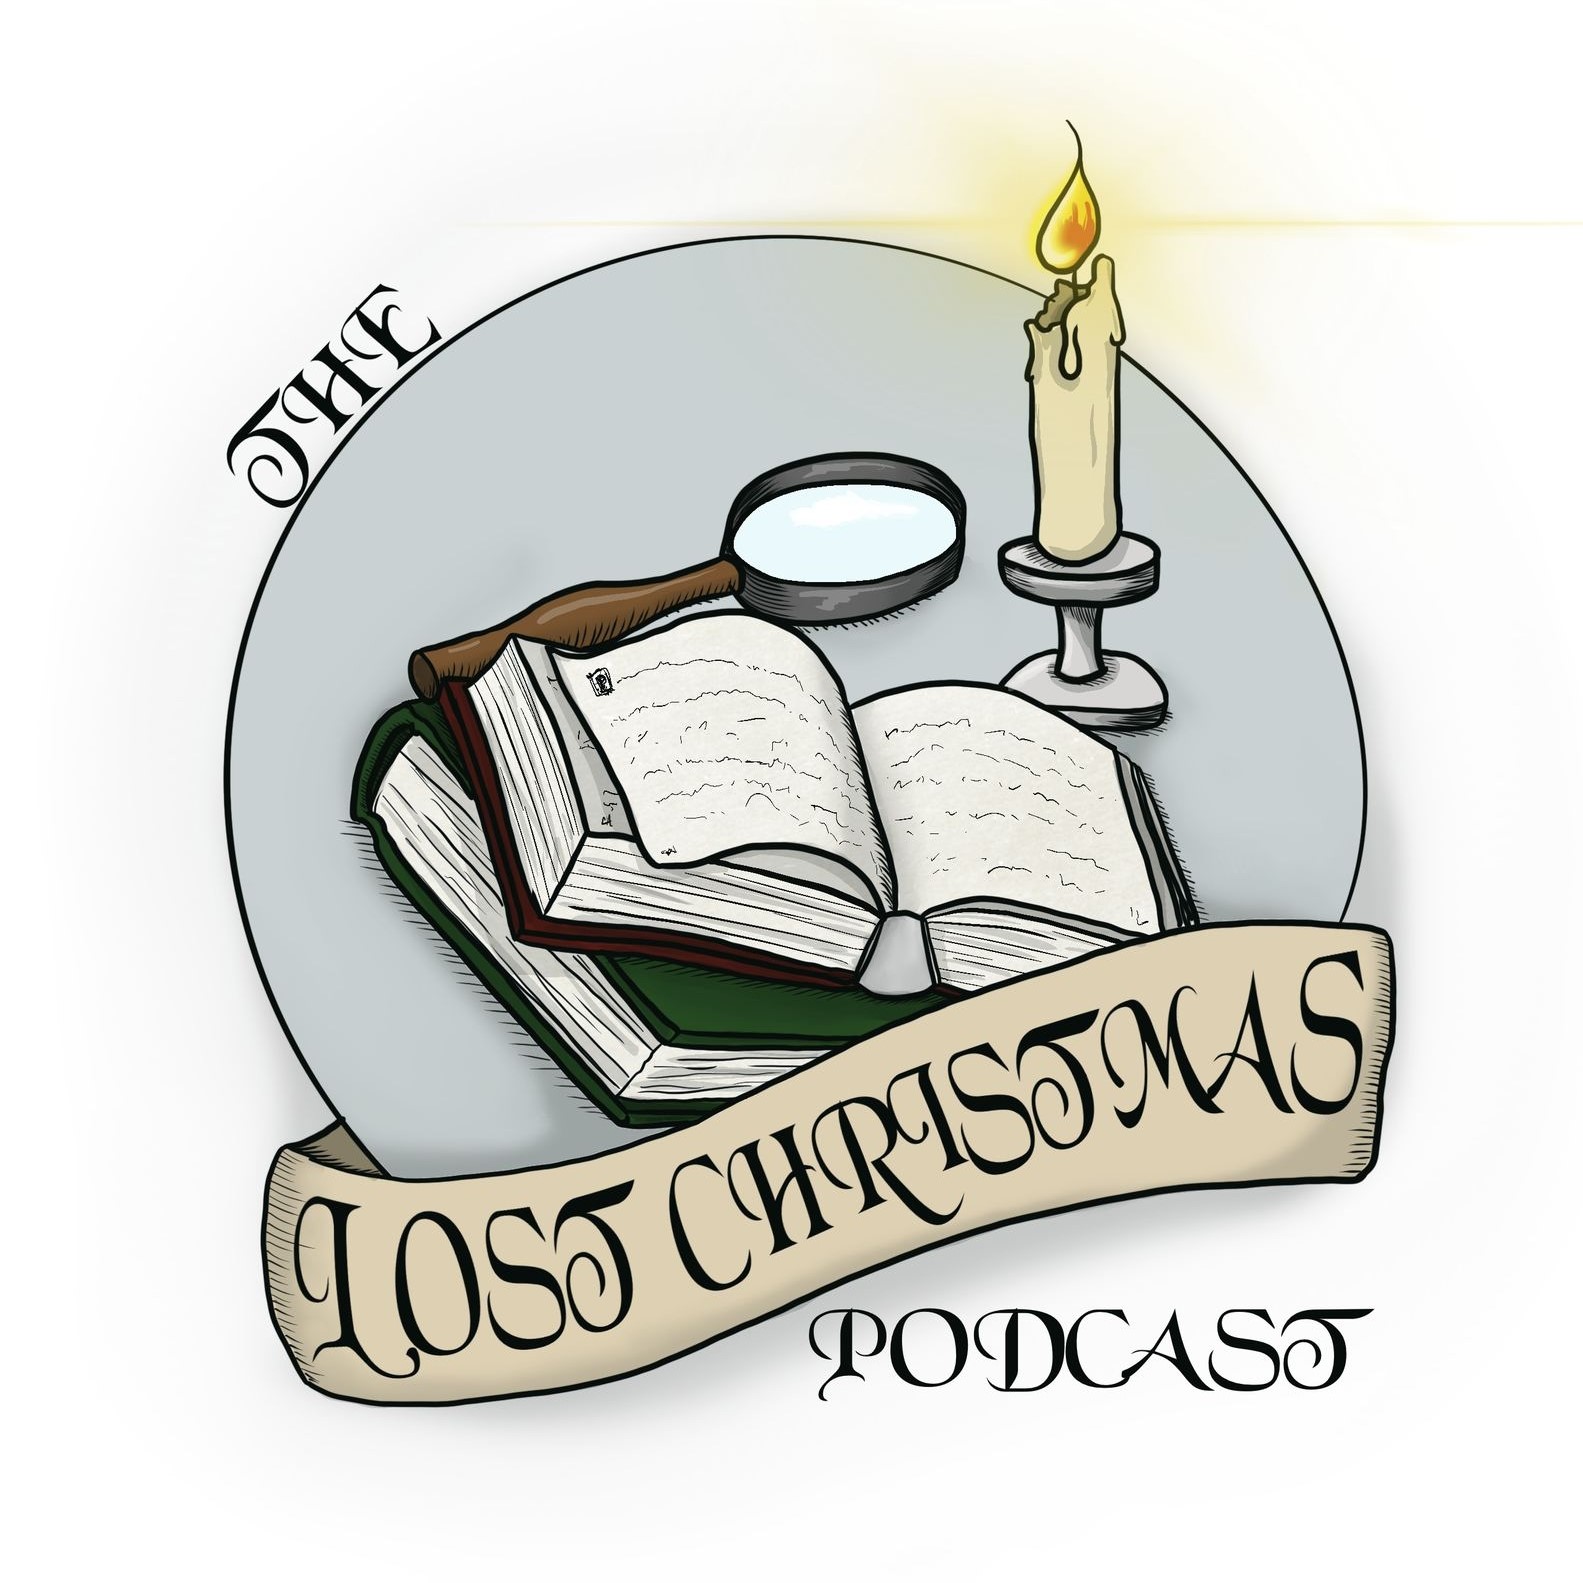 Lost Christmas Podcast